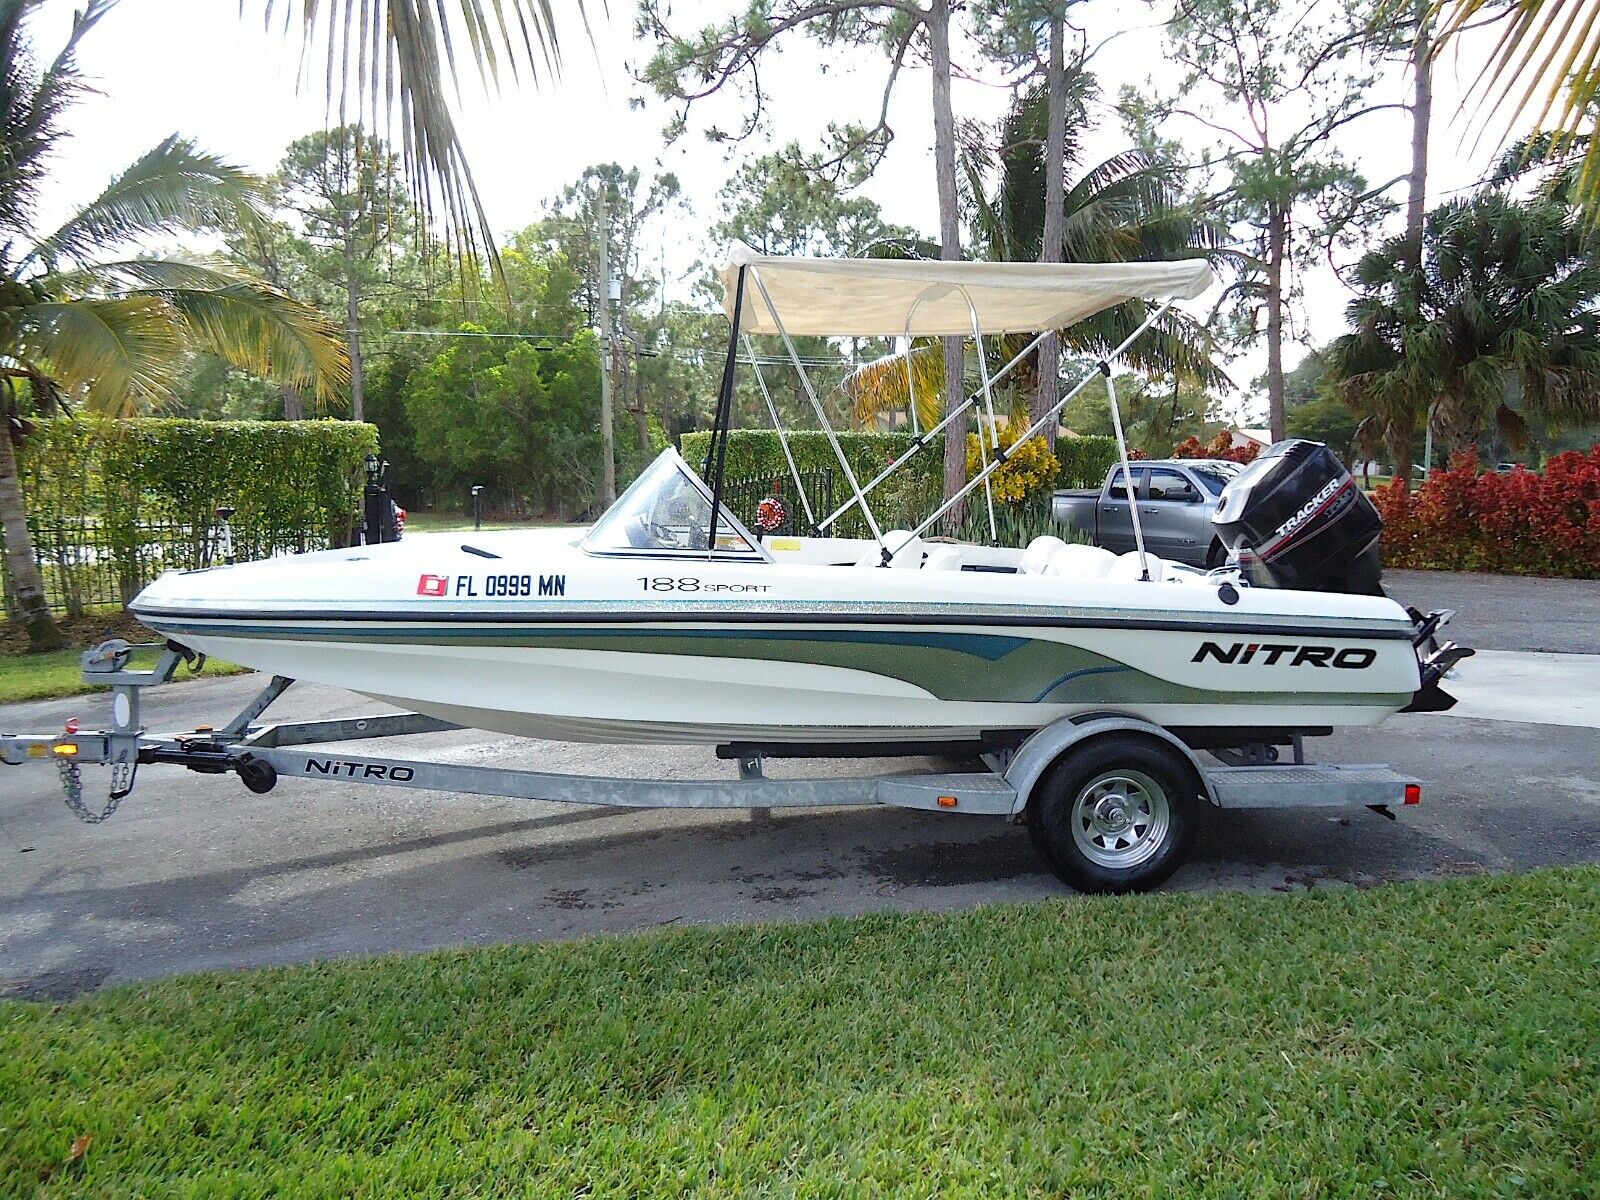 Tracker Nitro 188 2003 for sale for $6,900 - Boats-from-USA.com